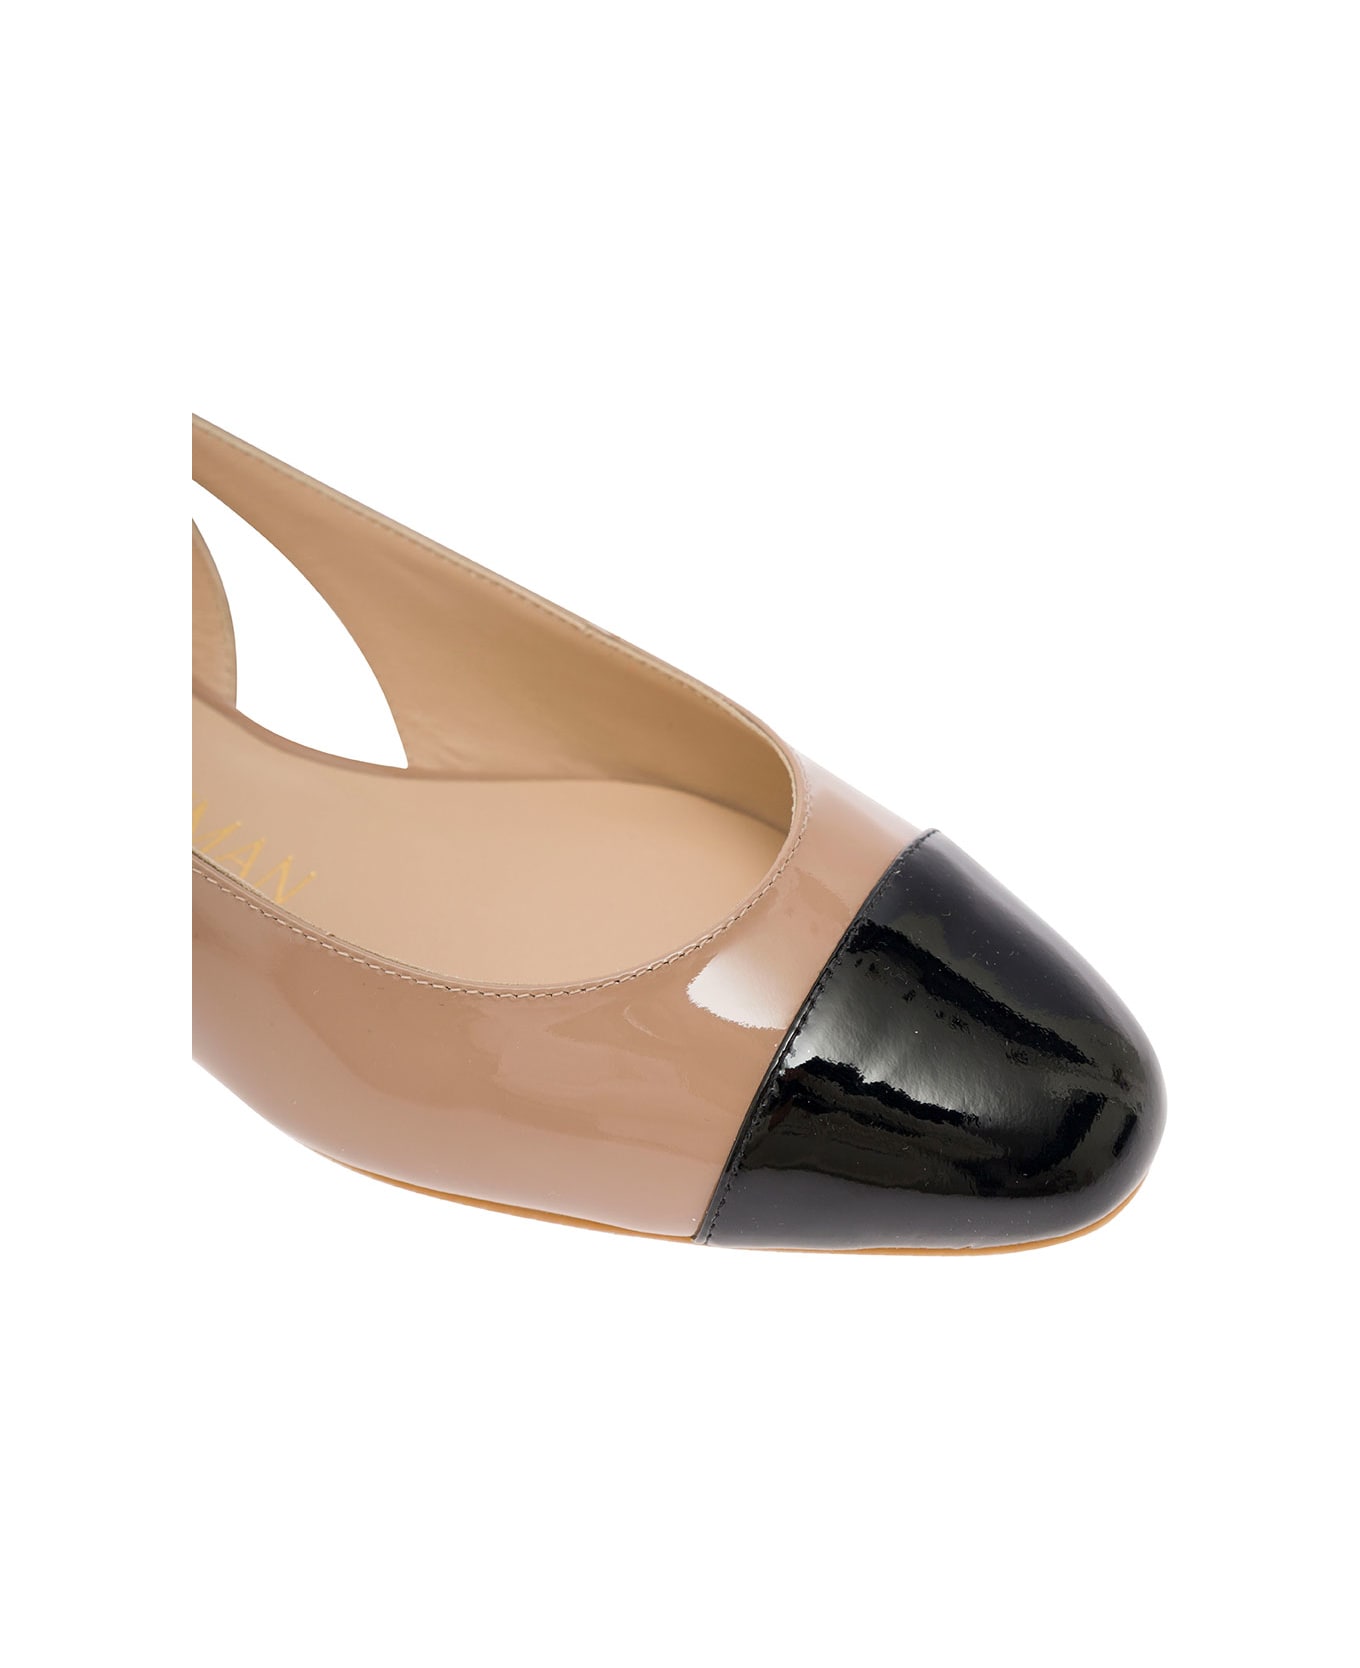 Stuart Weitzman Beige Slingback Mules With Contrasting Toe Cap In Patent Leather Woman - Black